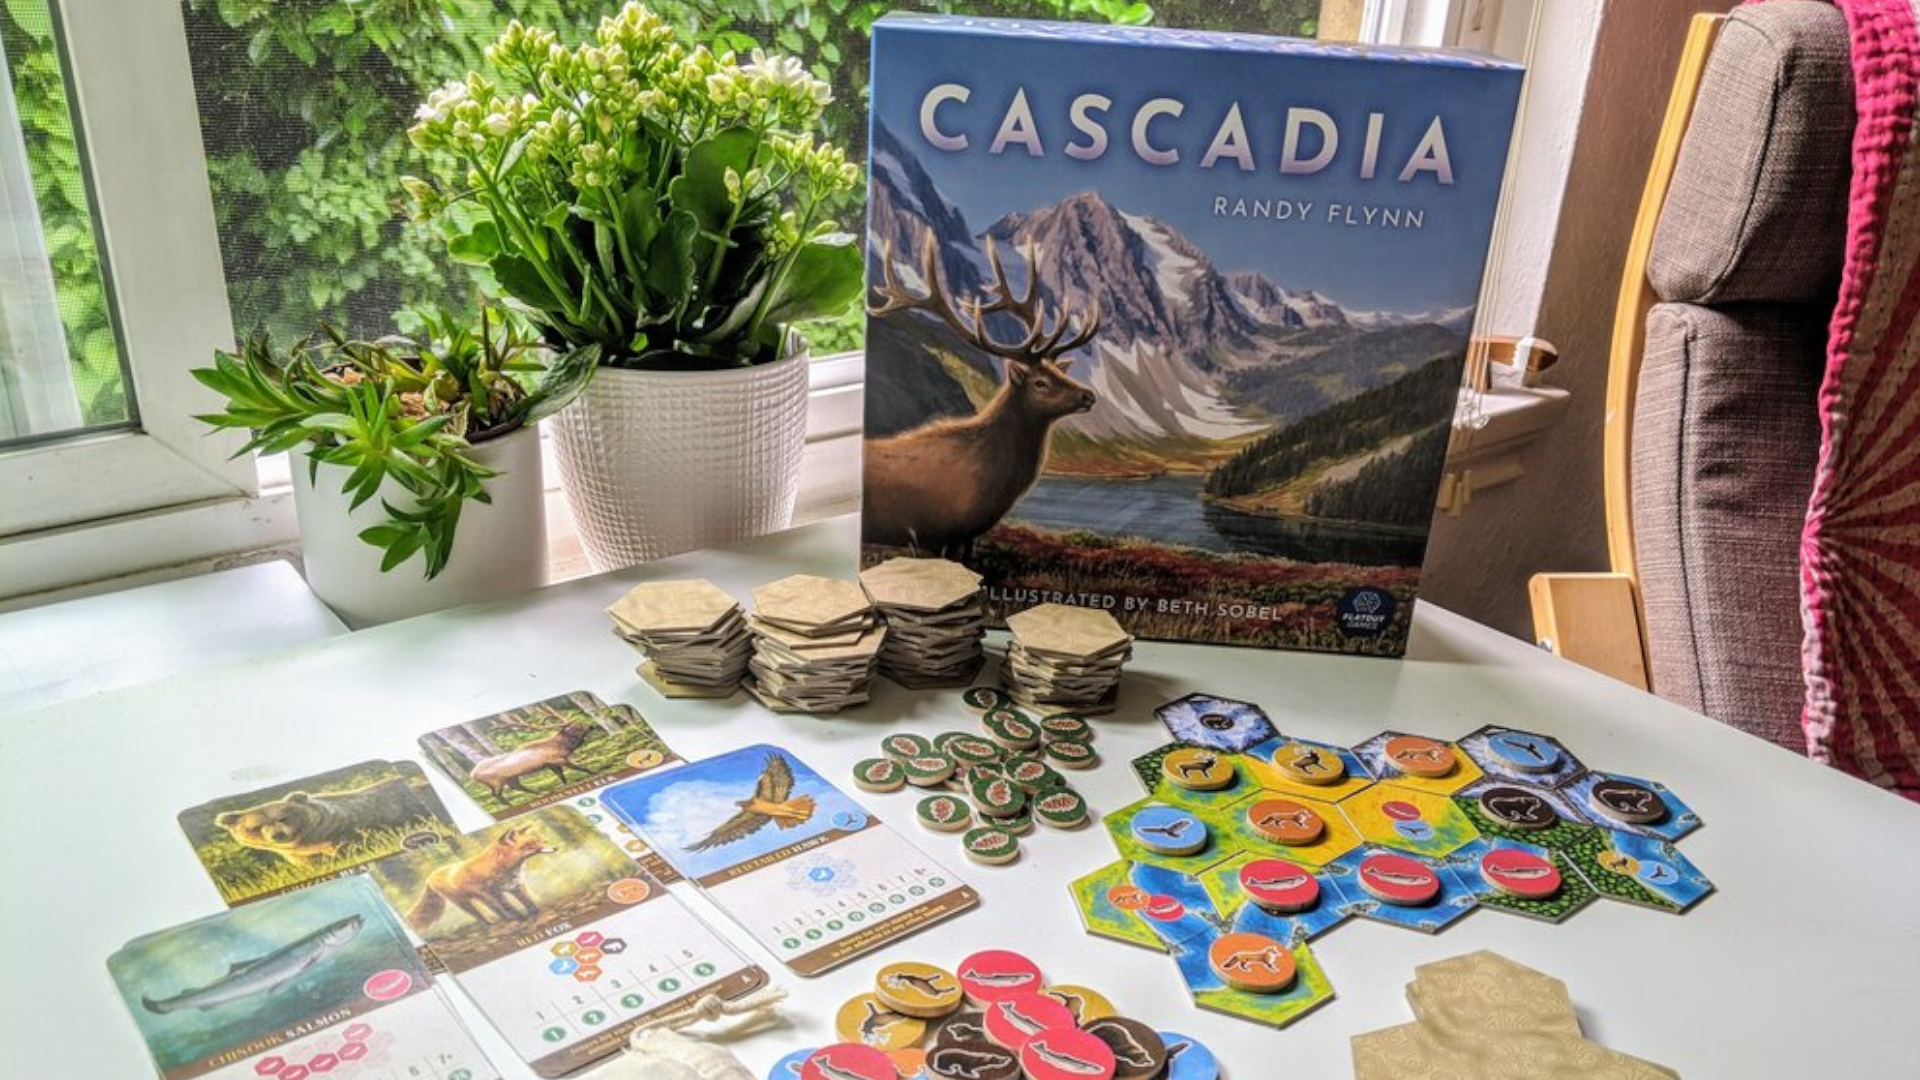 Cascadia is board game of the year after Spiel des Jahres 2022 win